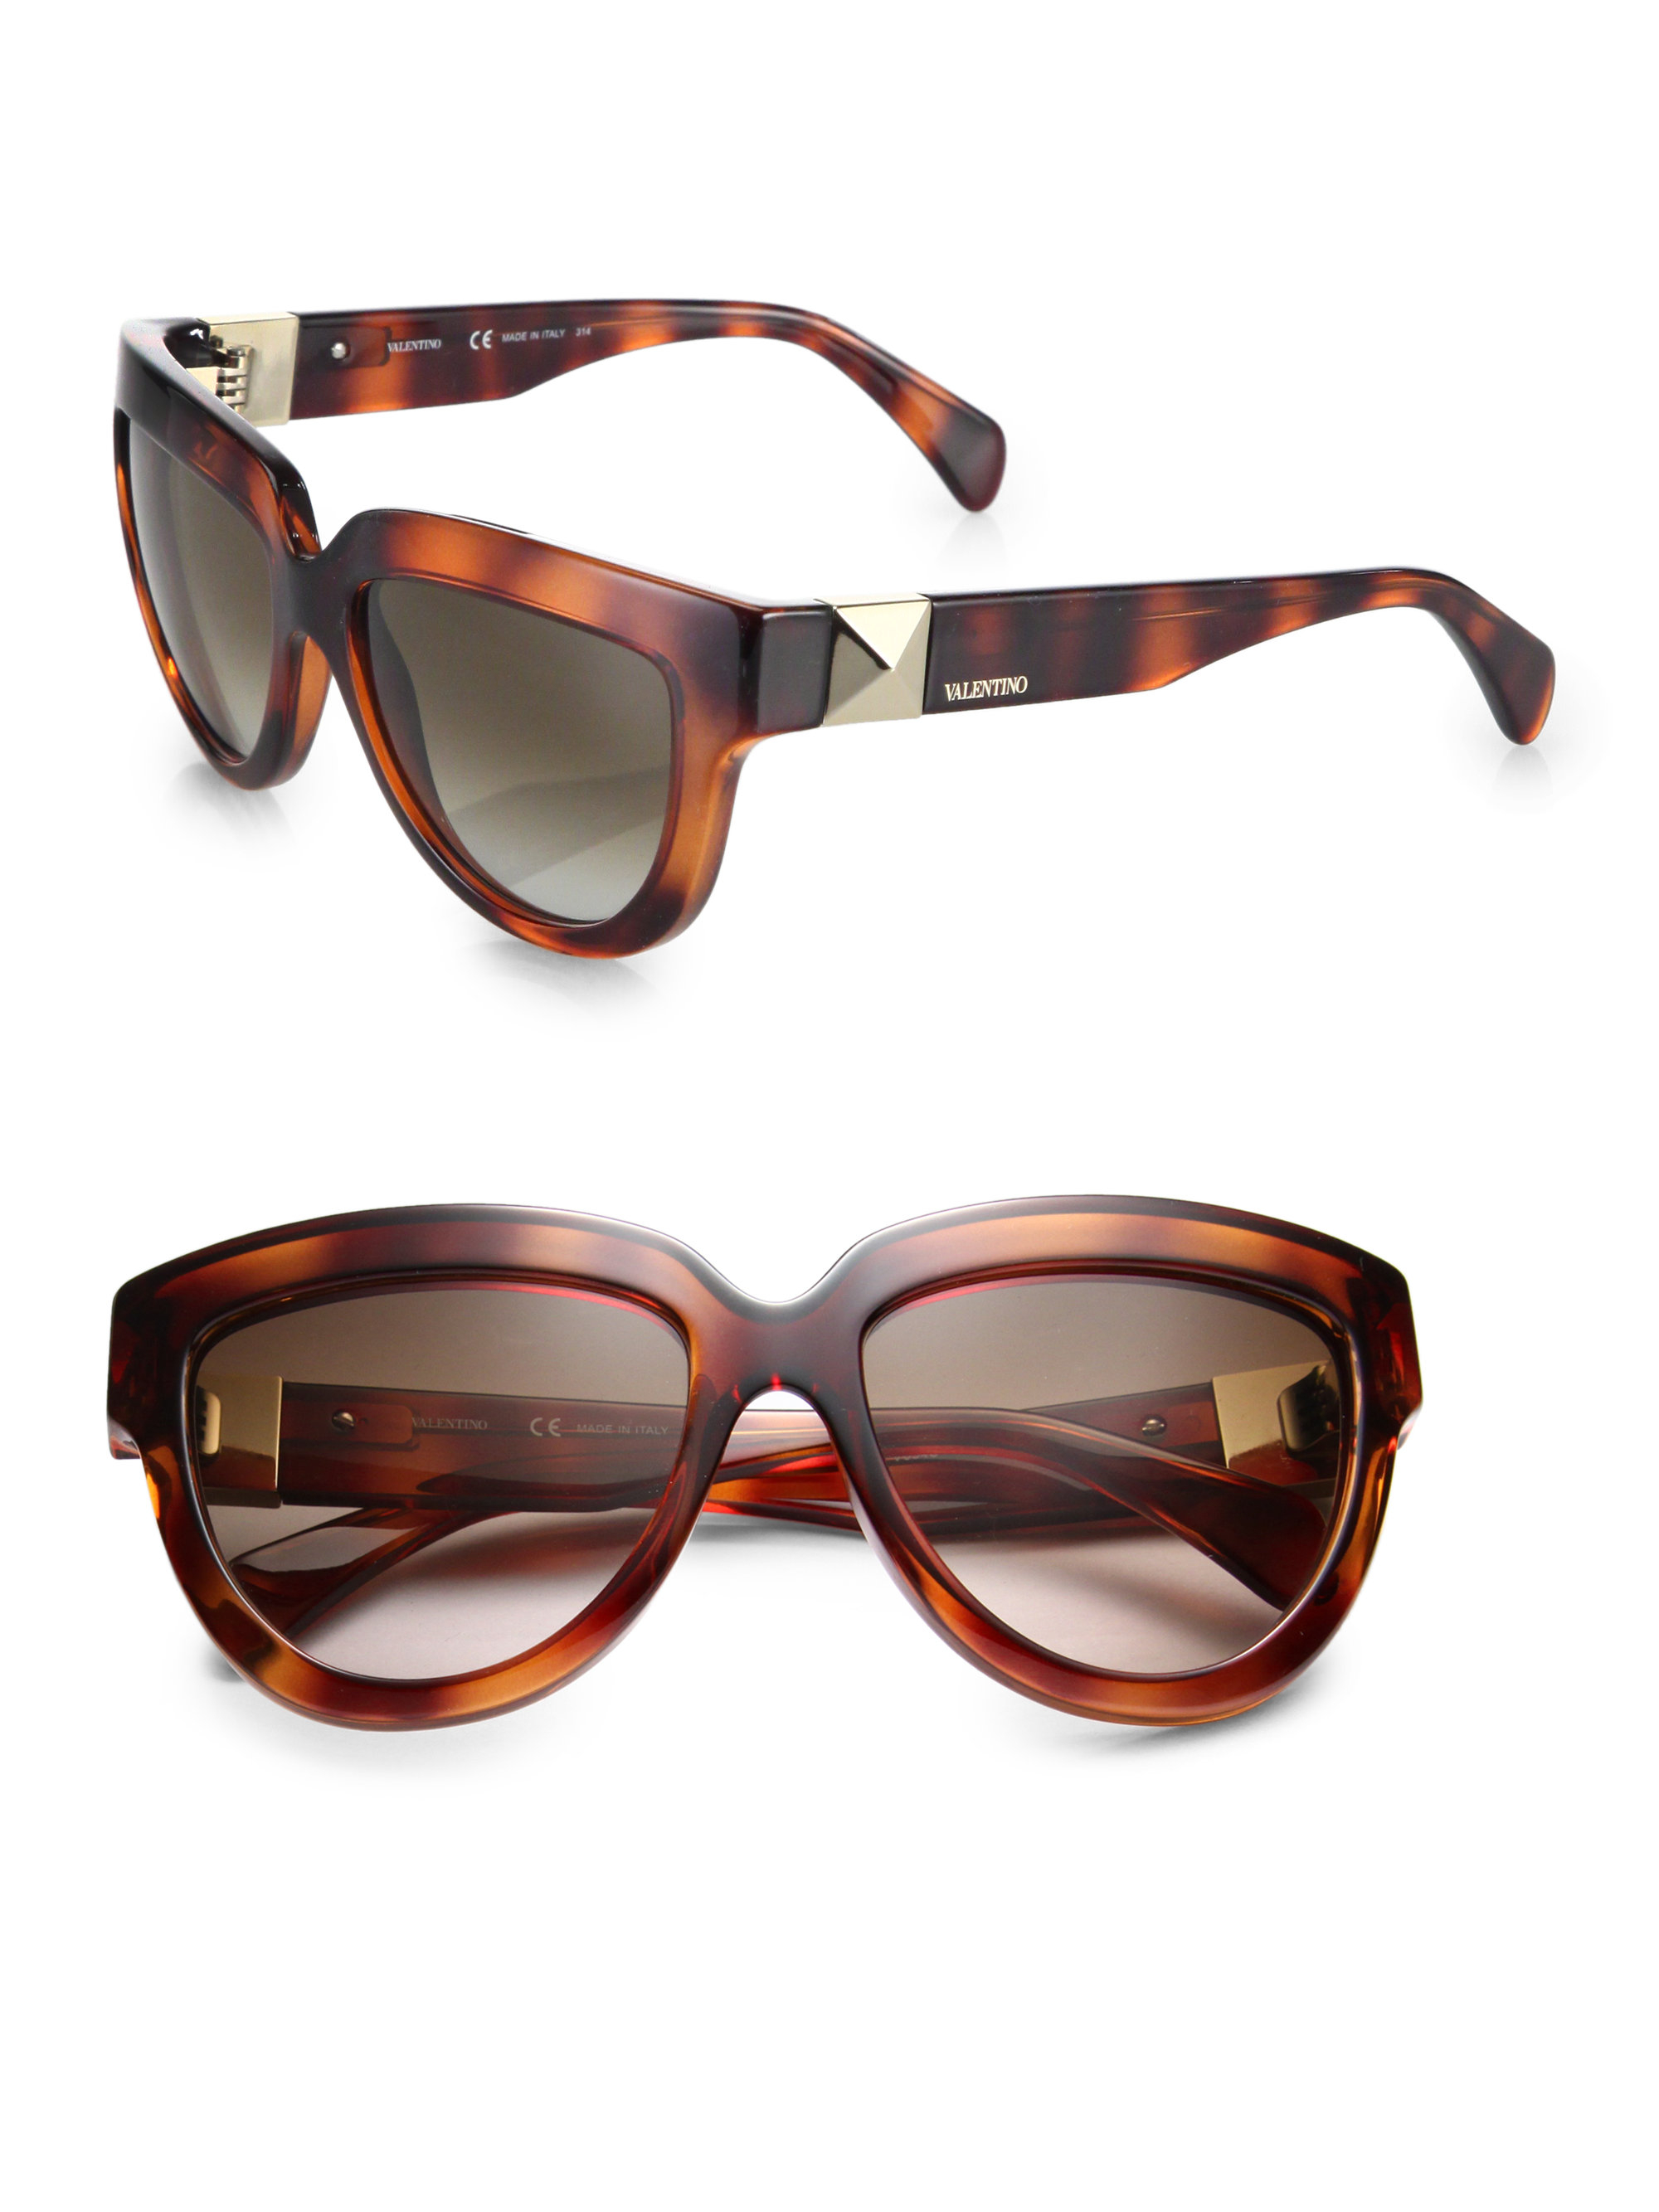 Lyst - Valentino 56Mm Pyramid-Stud D-Frame Sunglasses in Brown